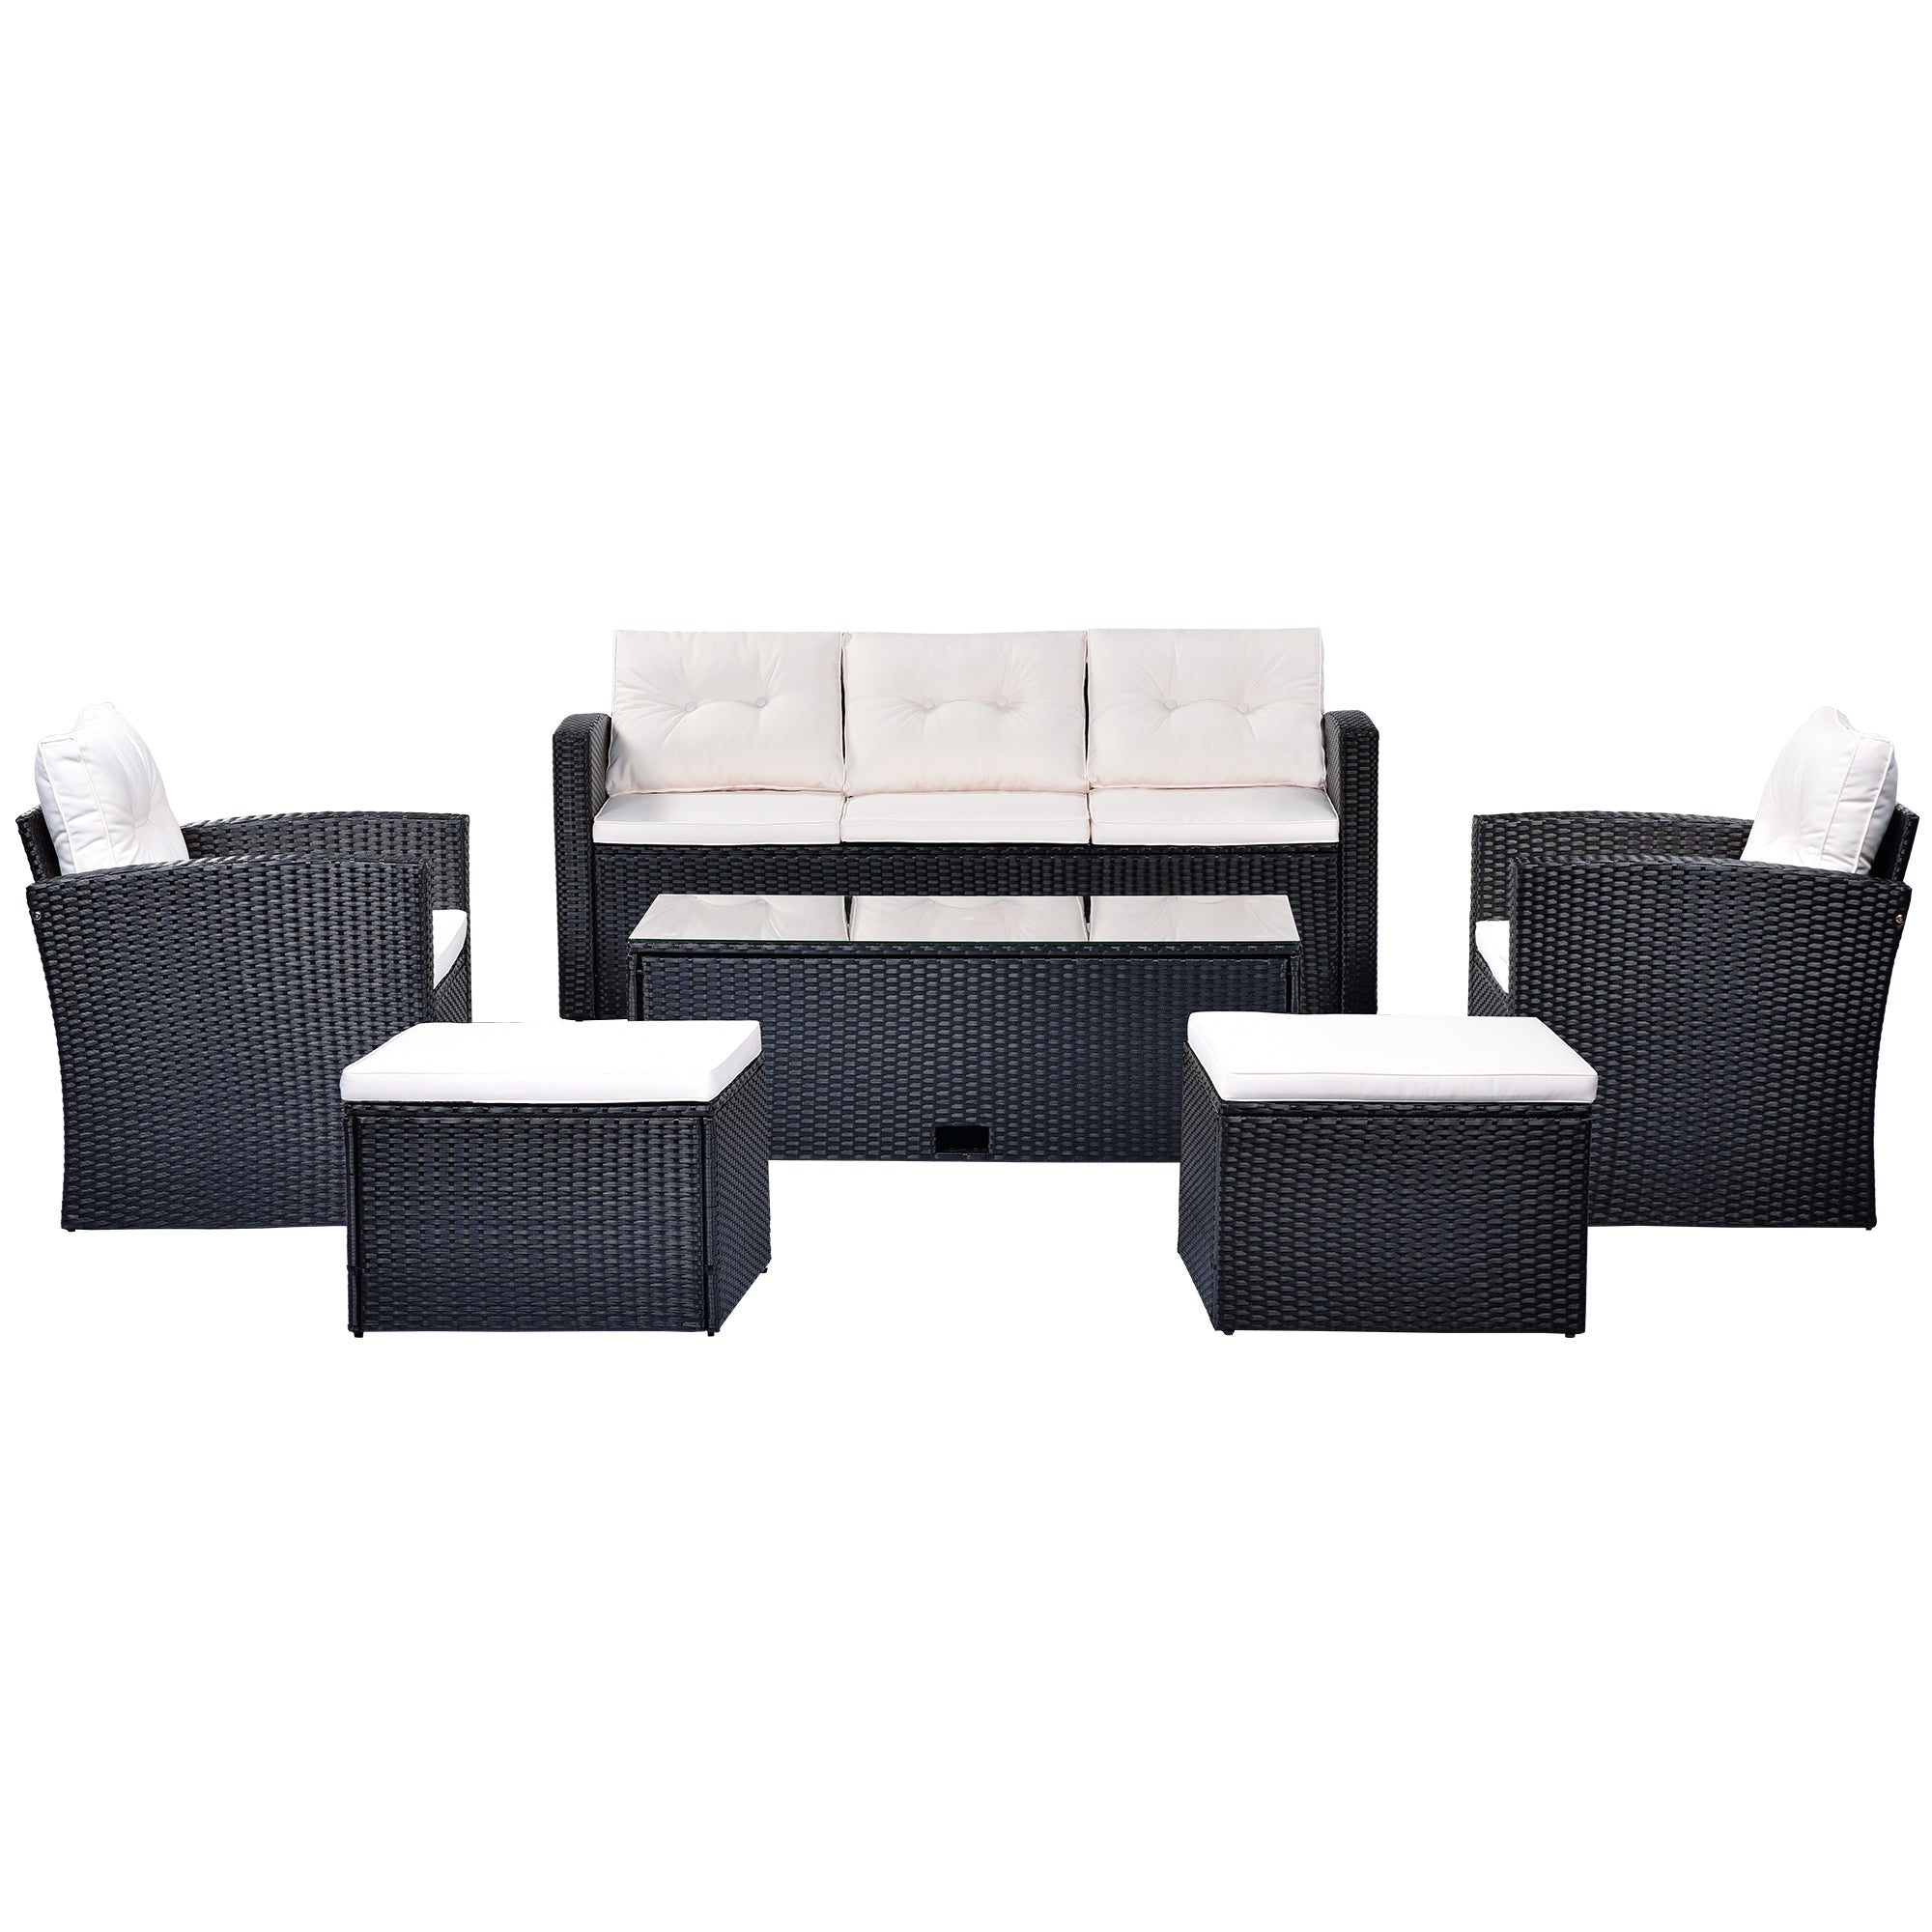 6-piece All-Weather Wicker PE rattan Patio Outdoor Dining Conversation Sectional Set with coffee table, wicker sofas, ottomans, removable cushions